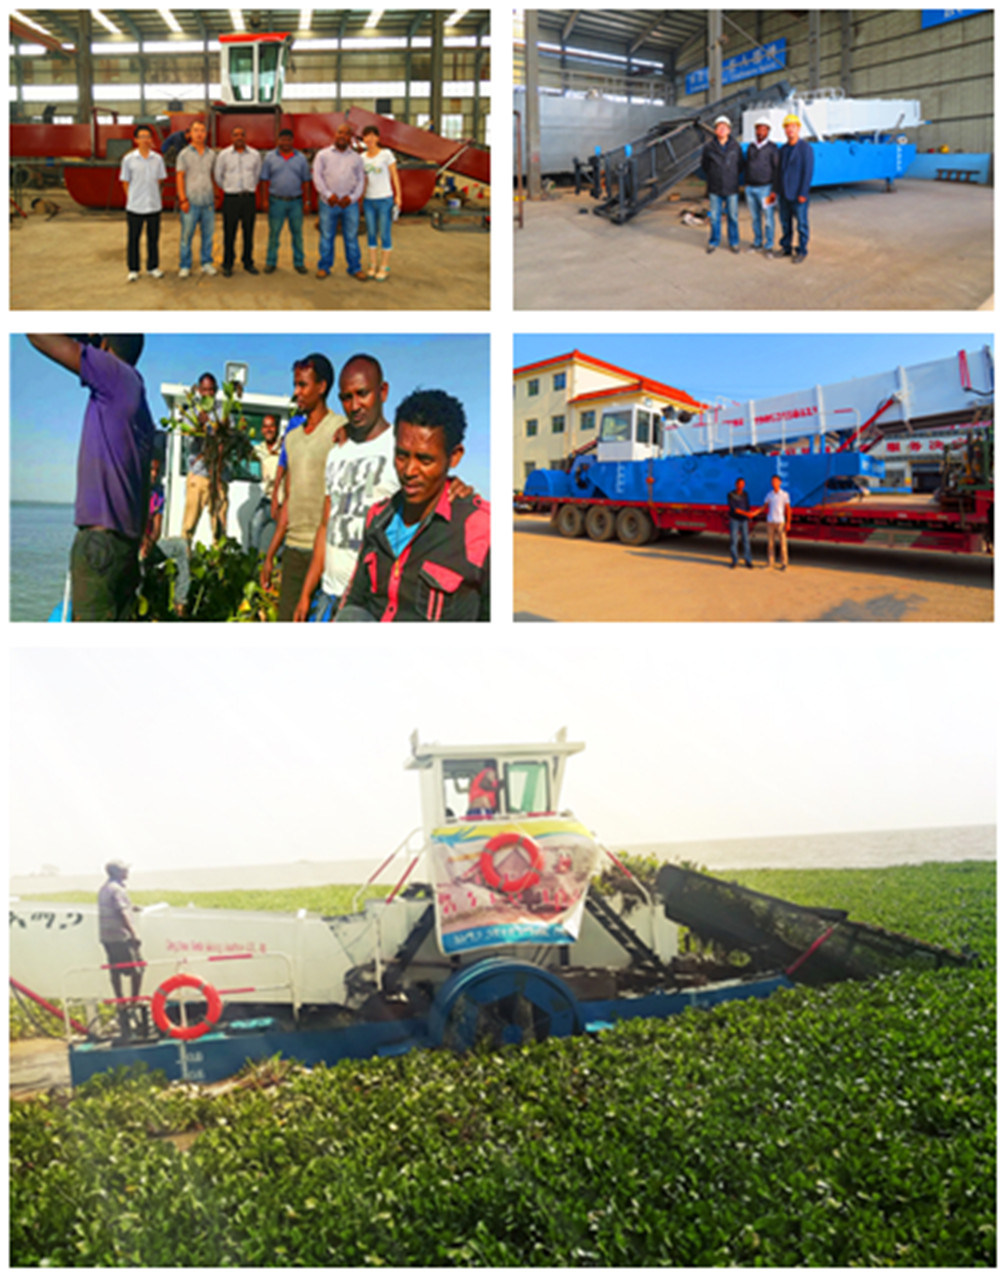 Water Plants Cutting Machine, Aquatic Weed Harvester, Garbage Salvage Boat